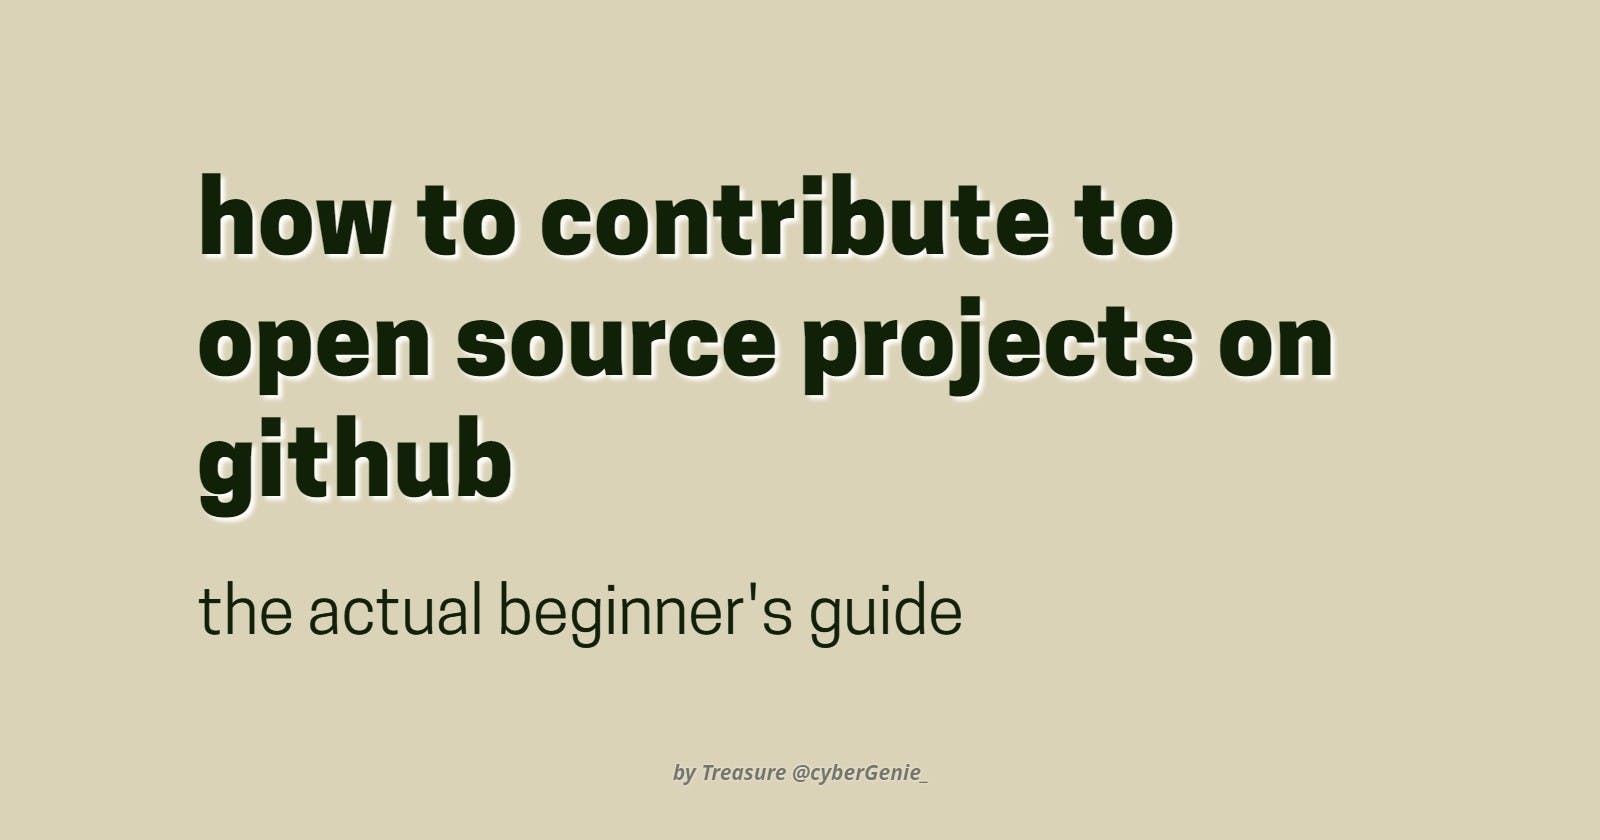 How to Contribute to Open Source Projects on GitHub